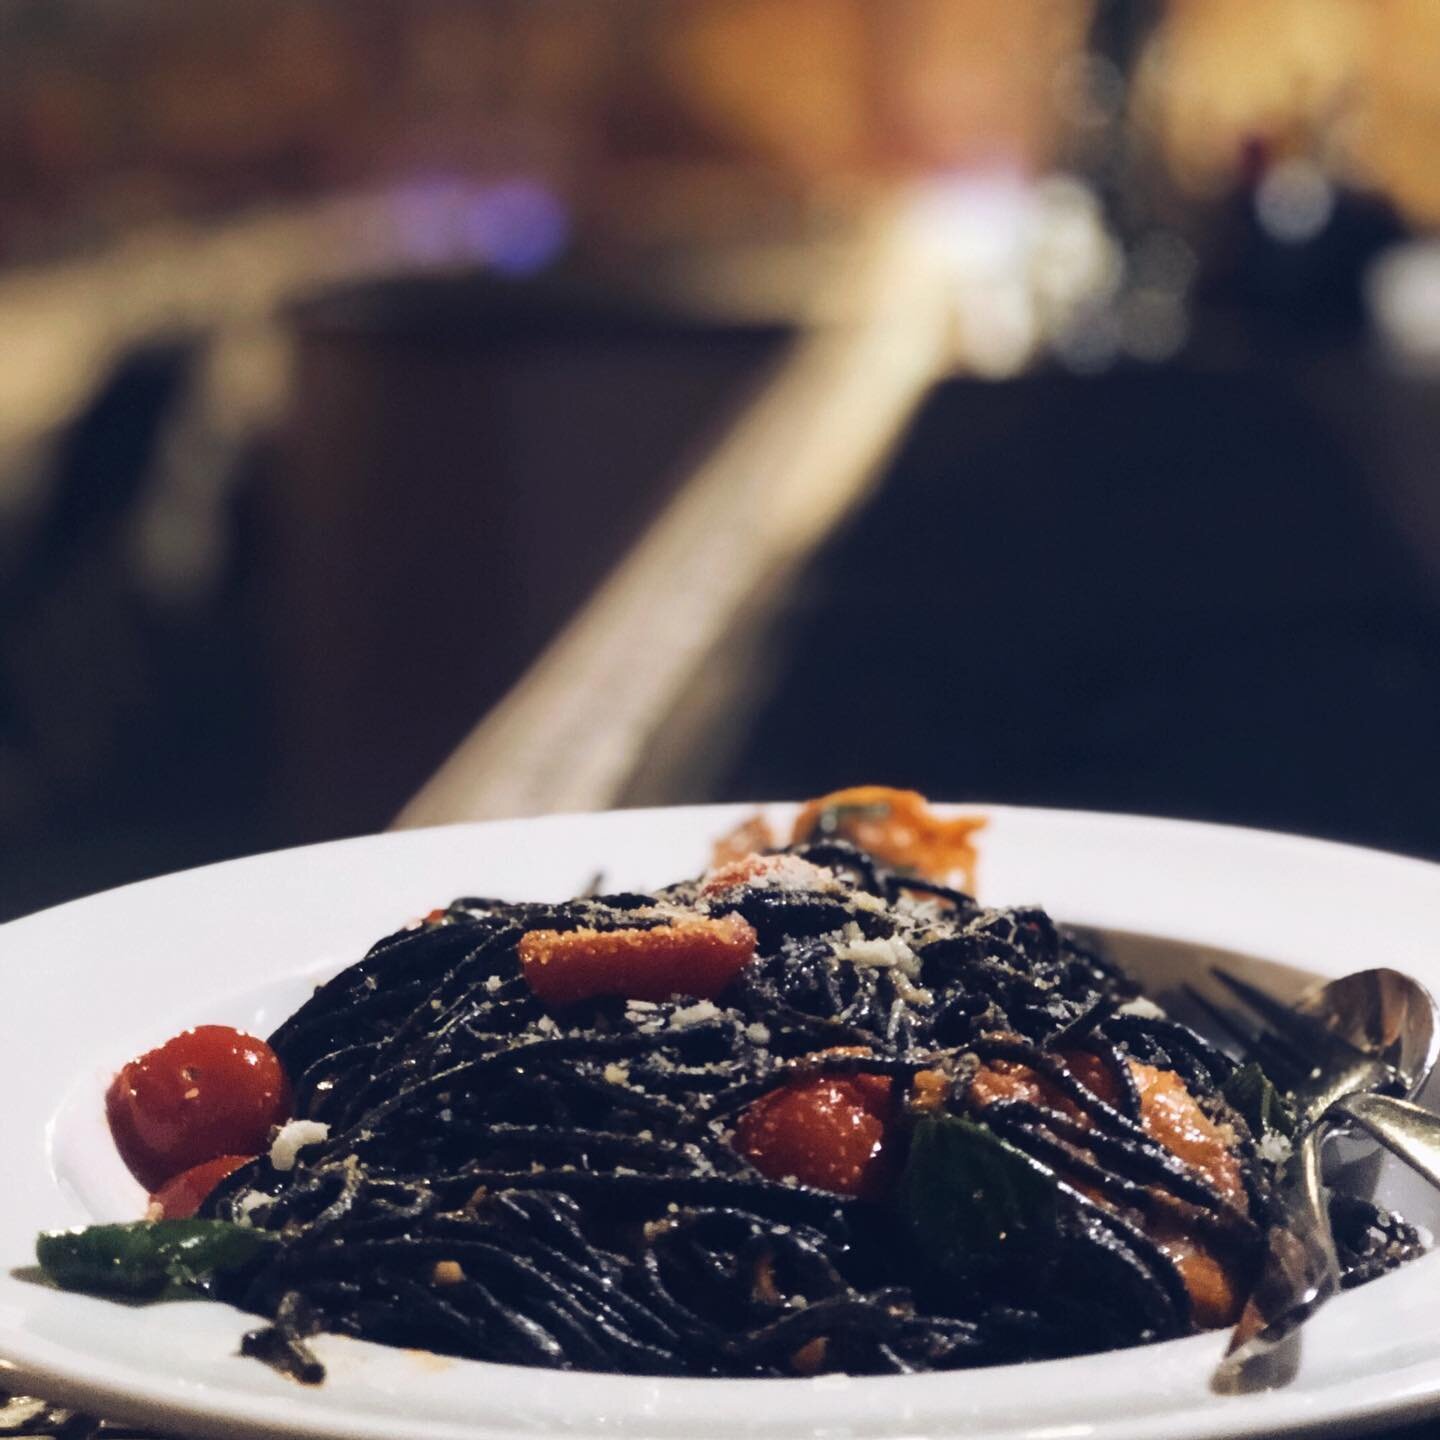 Stasera la specialit&agrave; &egrave; ... Squid ink pasta w prawns, garlic roasted cherry tomatoes, basil and chilli 🍝 -
-
-
#speciale #authenticitalian #dinewithus #italianfood #pastalife